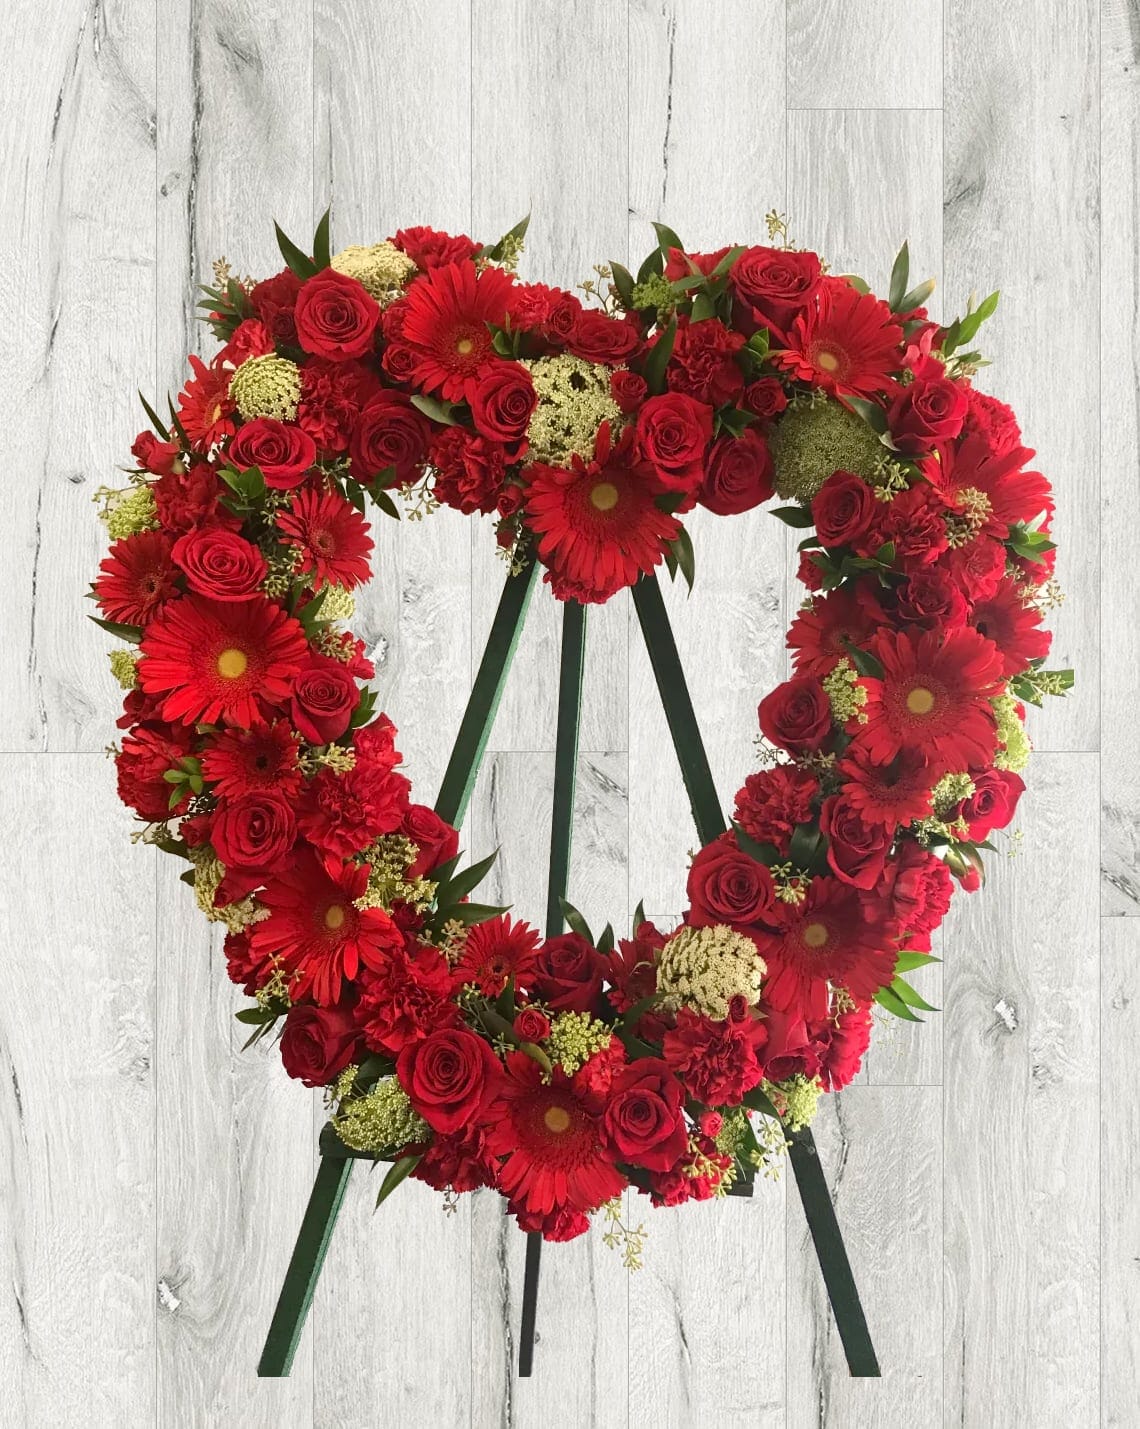 Tender Thoughts Heart-Shaped Wreath - When someone so dear passes, a standing tribute is a fitting way to pay respects. Our impressive hart-shaped standing spray arrangement, meticulously handcrafted by expert florists with red roses, gerbera daisies and carnations, is a lush, full presentation that makes for a proud and respectful commemoration.